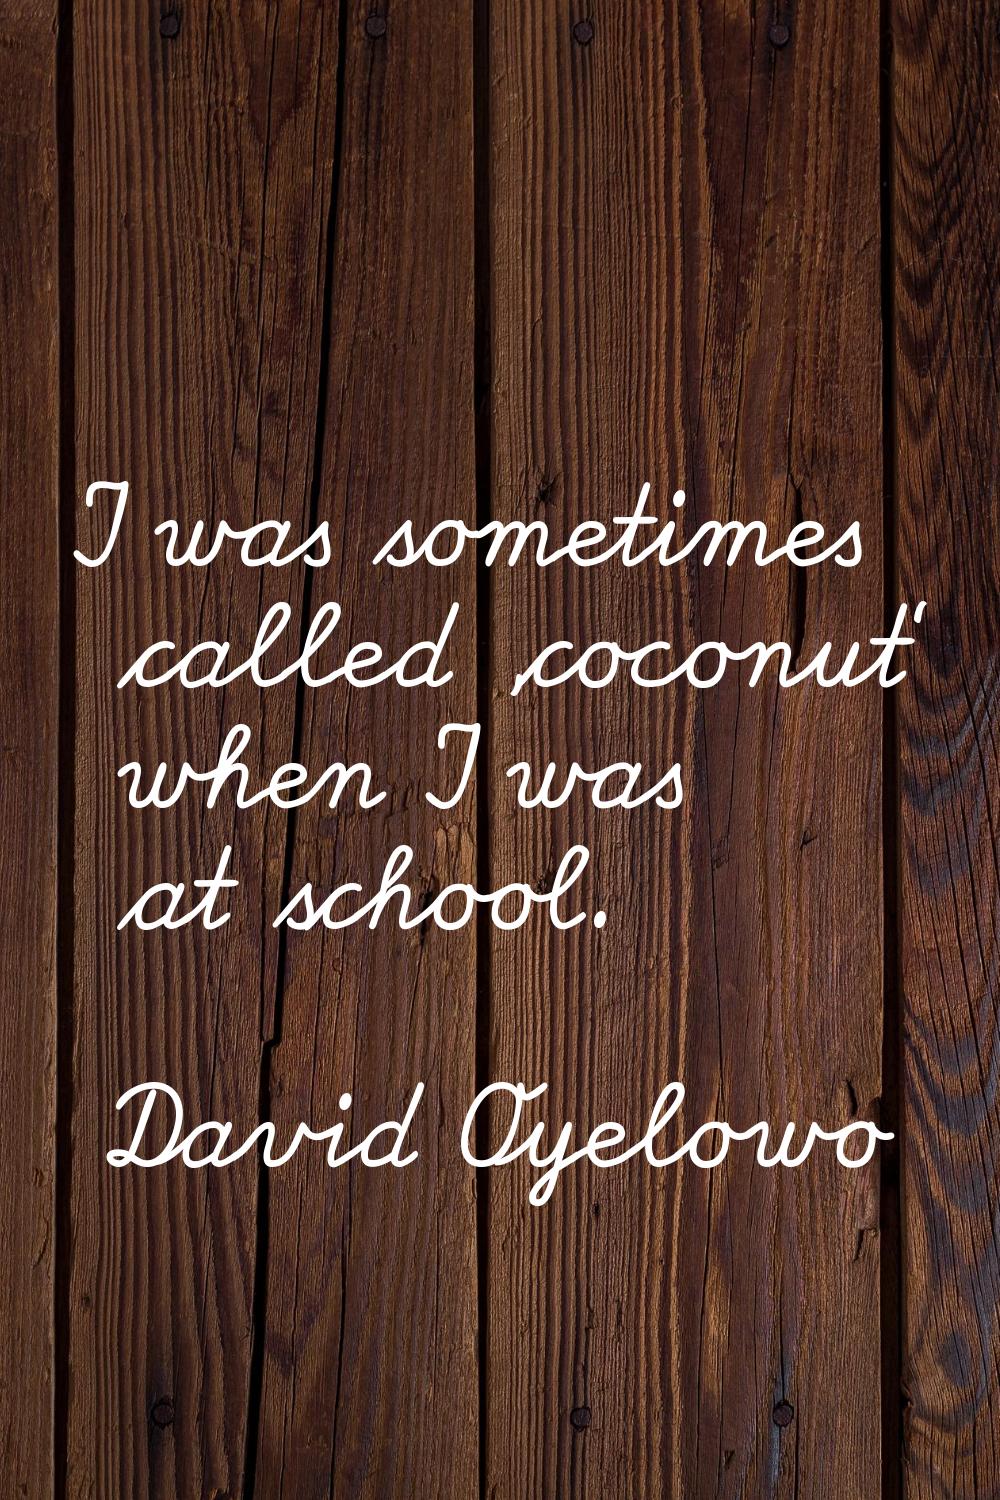 I was sometimes called 'coconut' when I was at school.